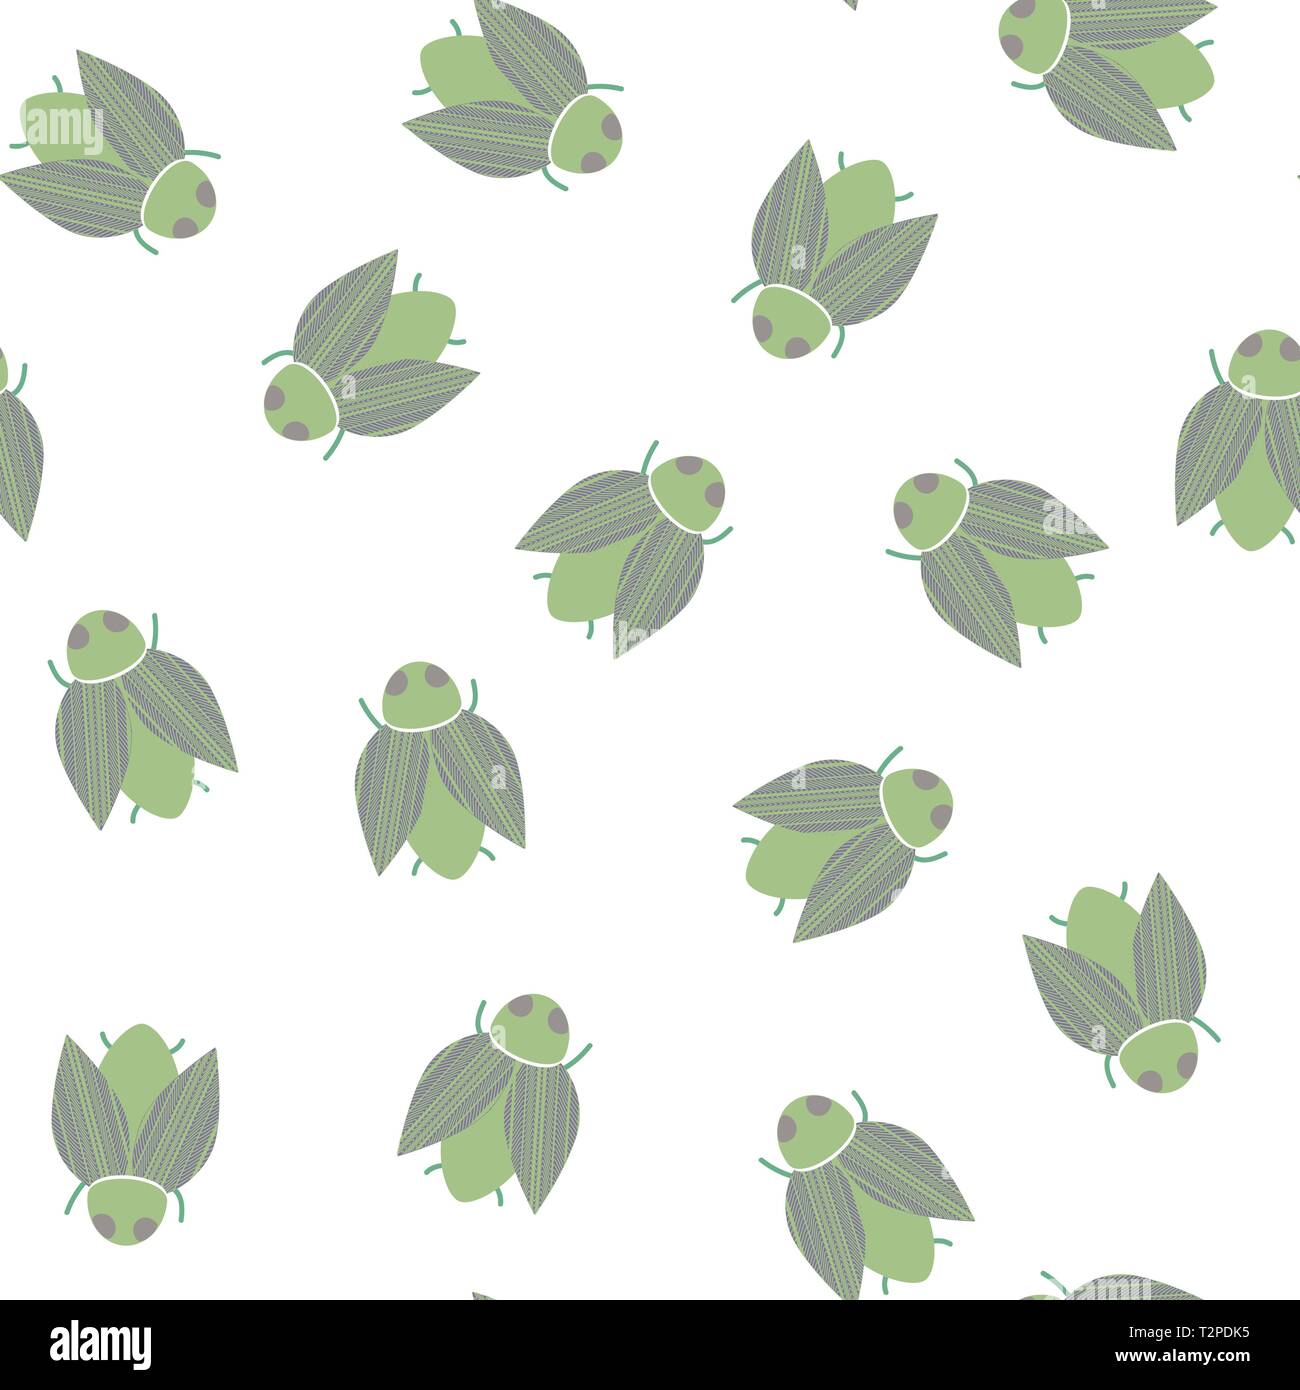 Seamless pattern with beetle on the white background. Insect illustration Stock Vector